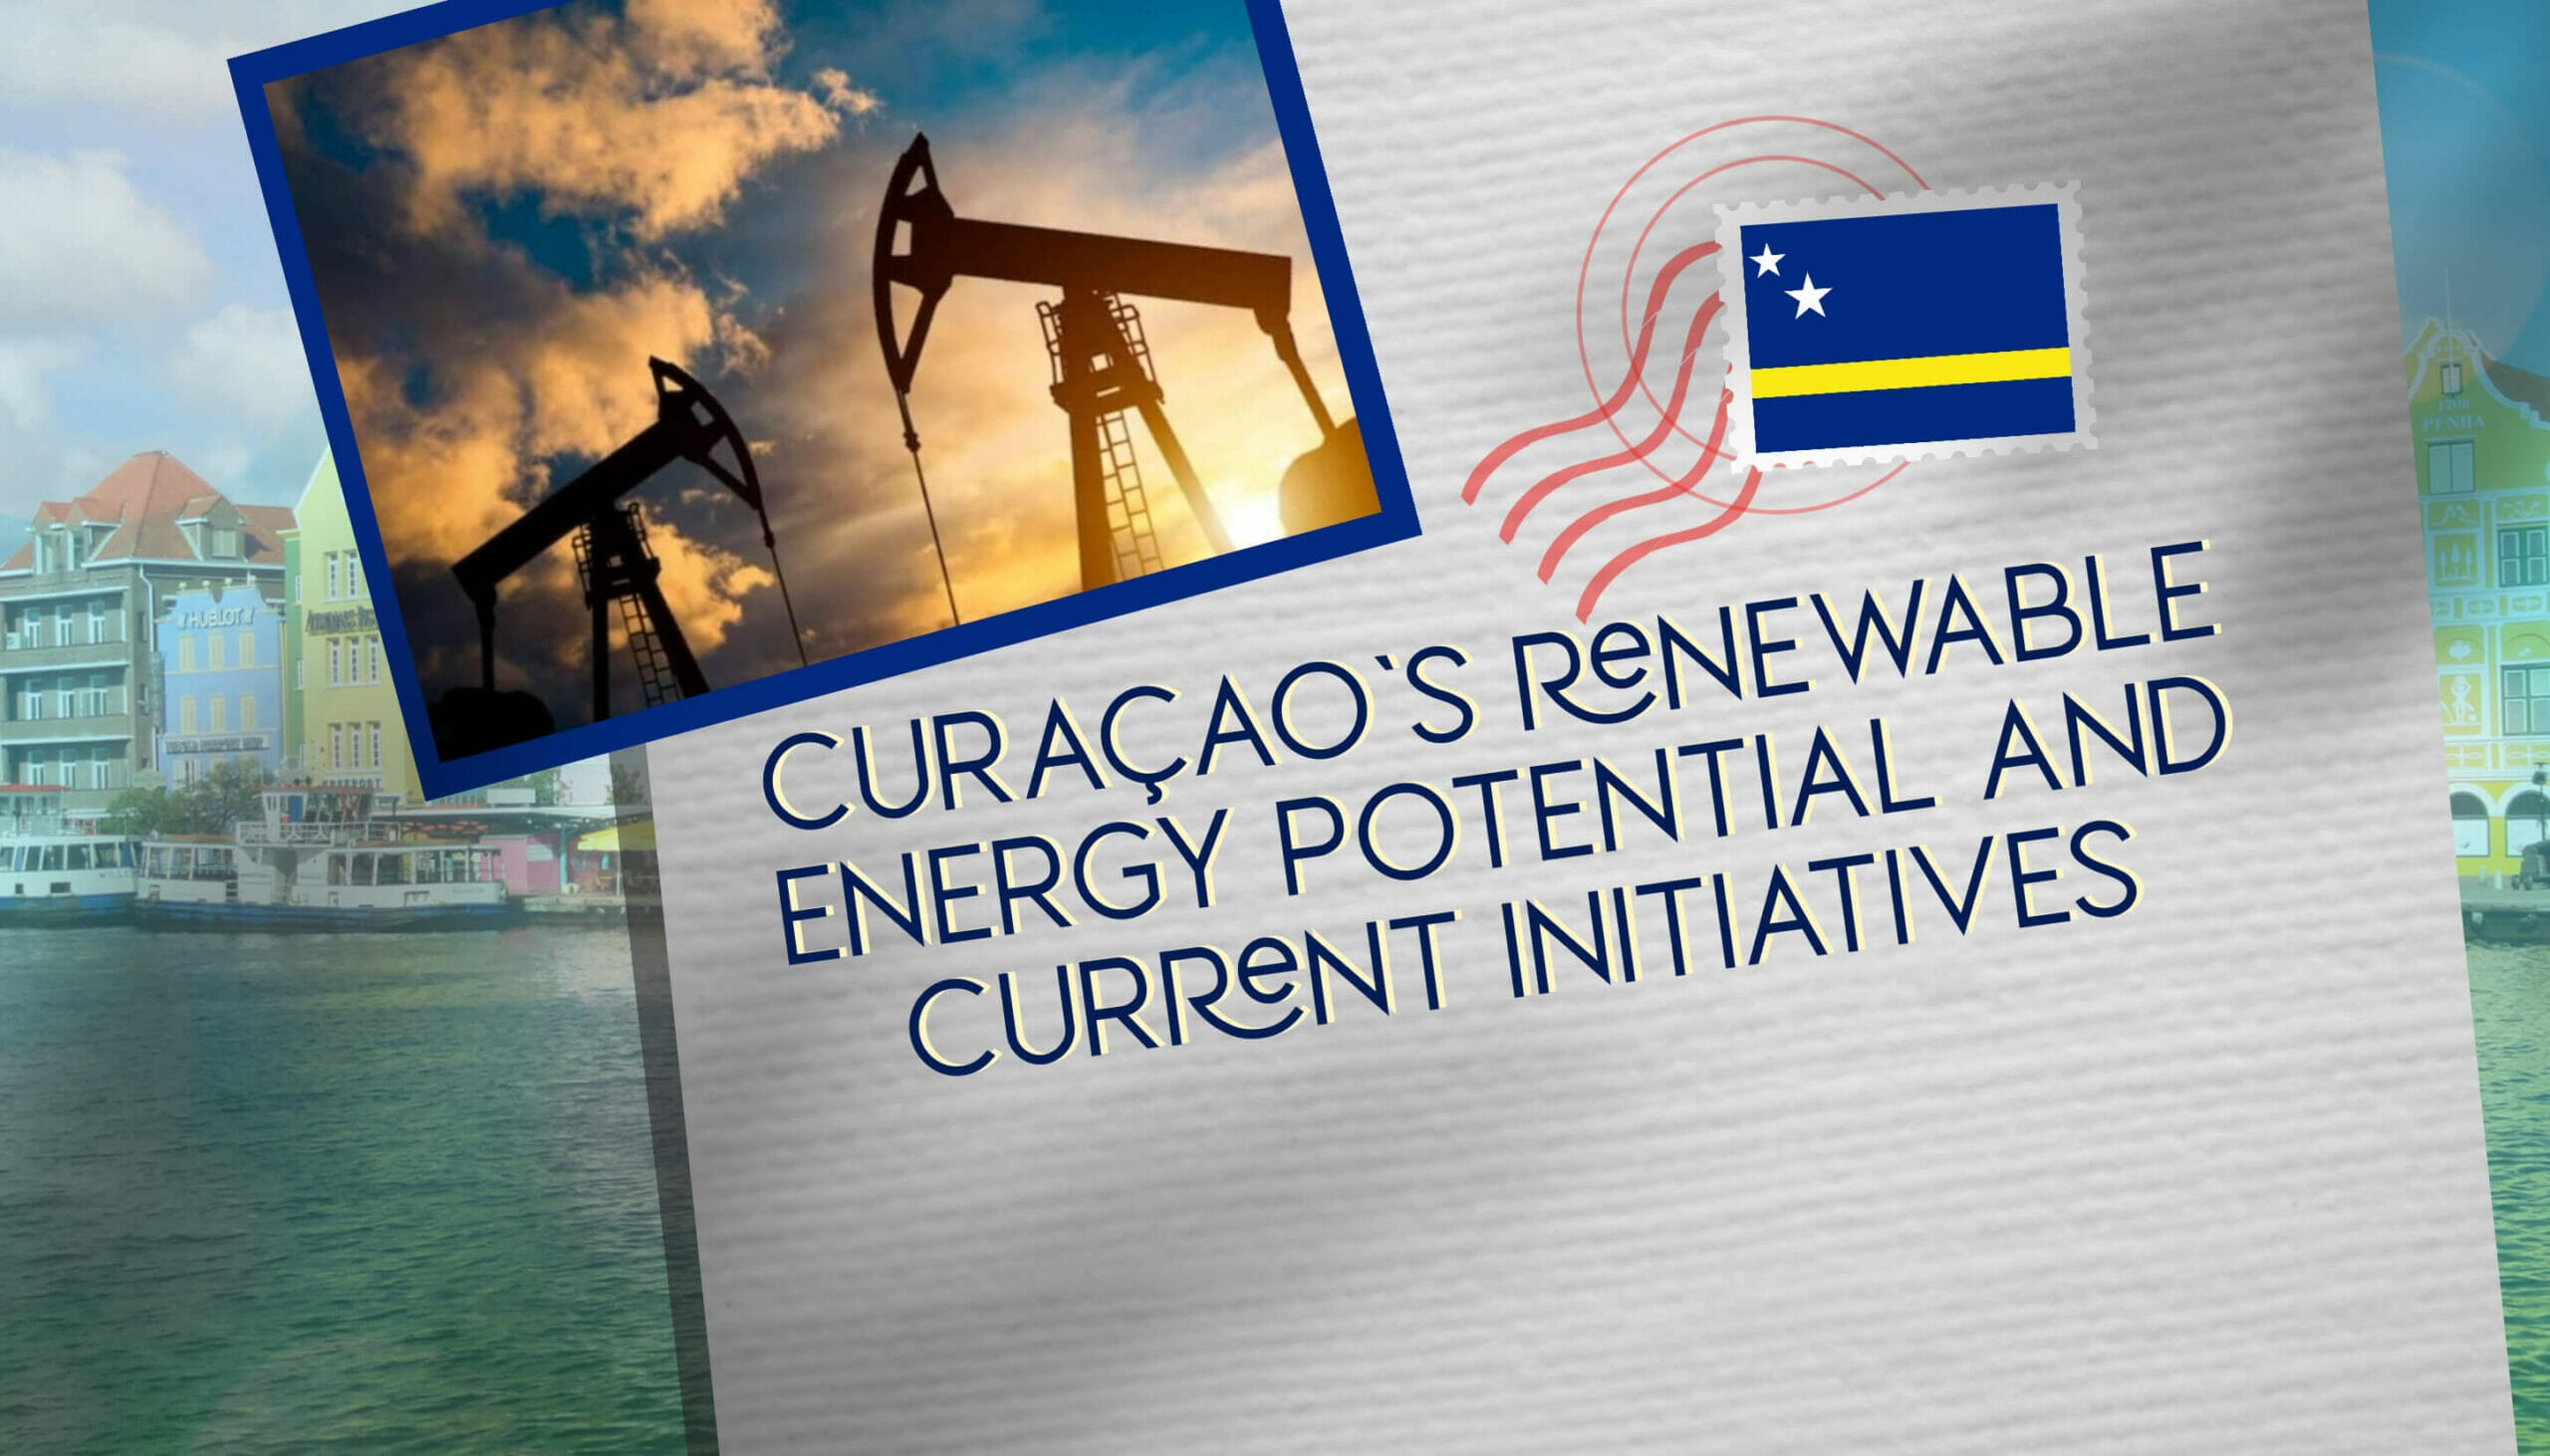 Curaçao's Renewable Energy Potential and Current Initiatives